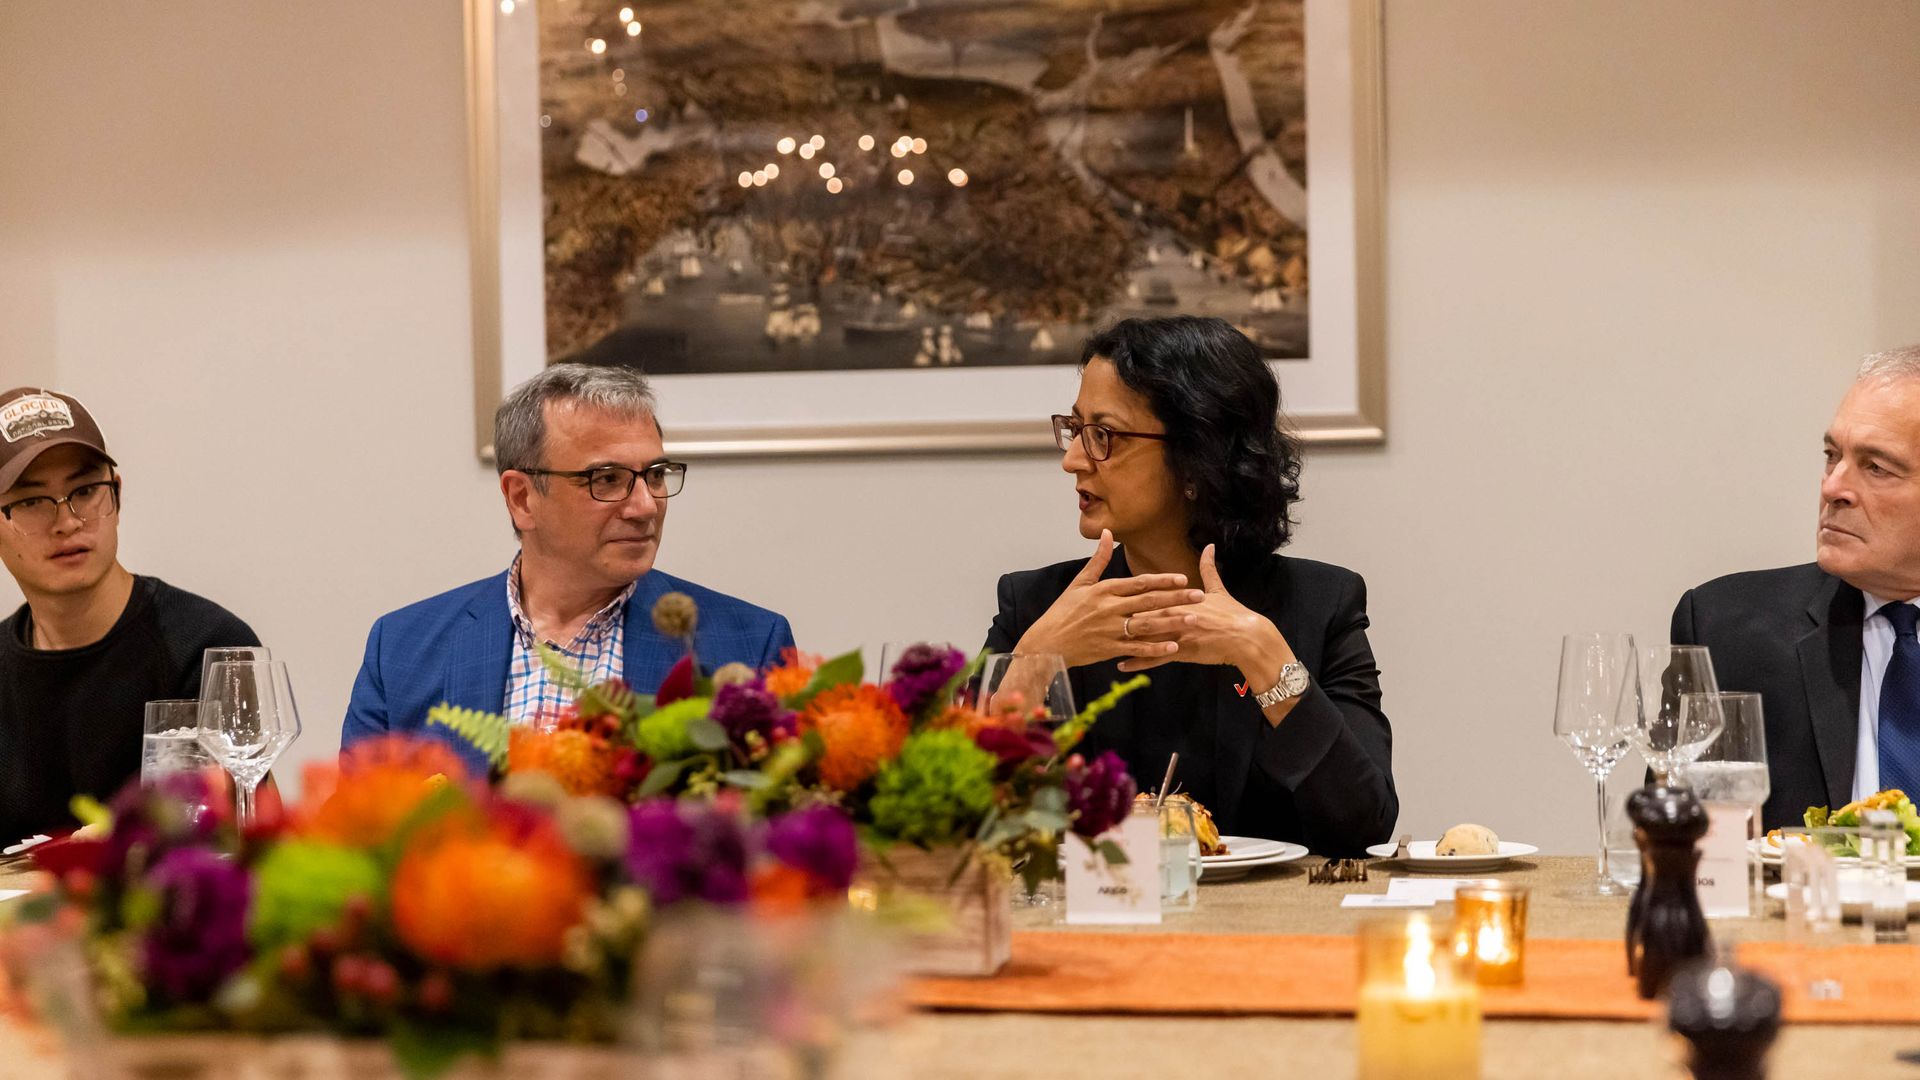 Rima Qureshi, Chief Strategy Officer at Verizon, sits at the Axios table between Aaron Pressman, left, and Michael Helfrich. 